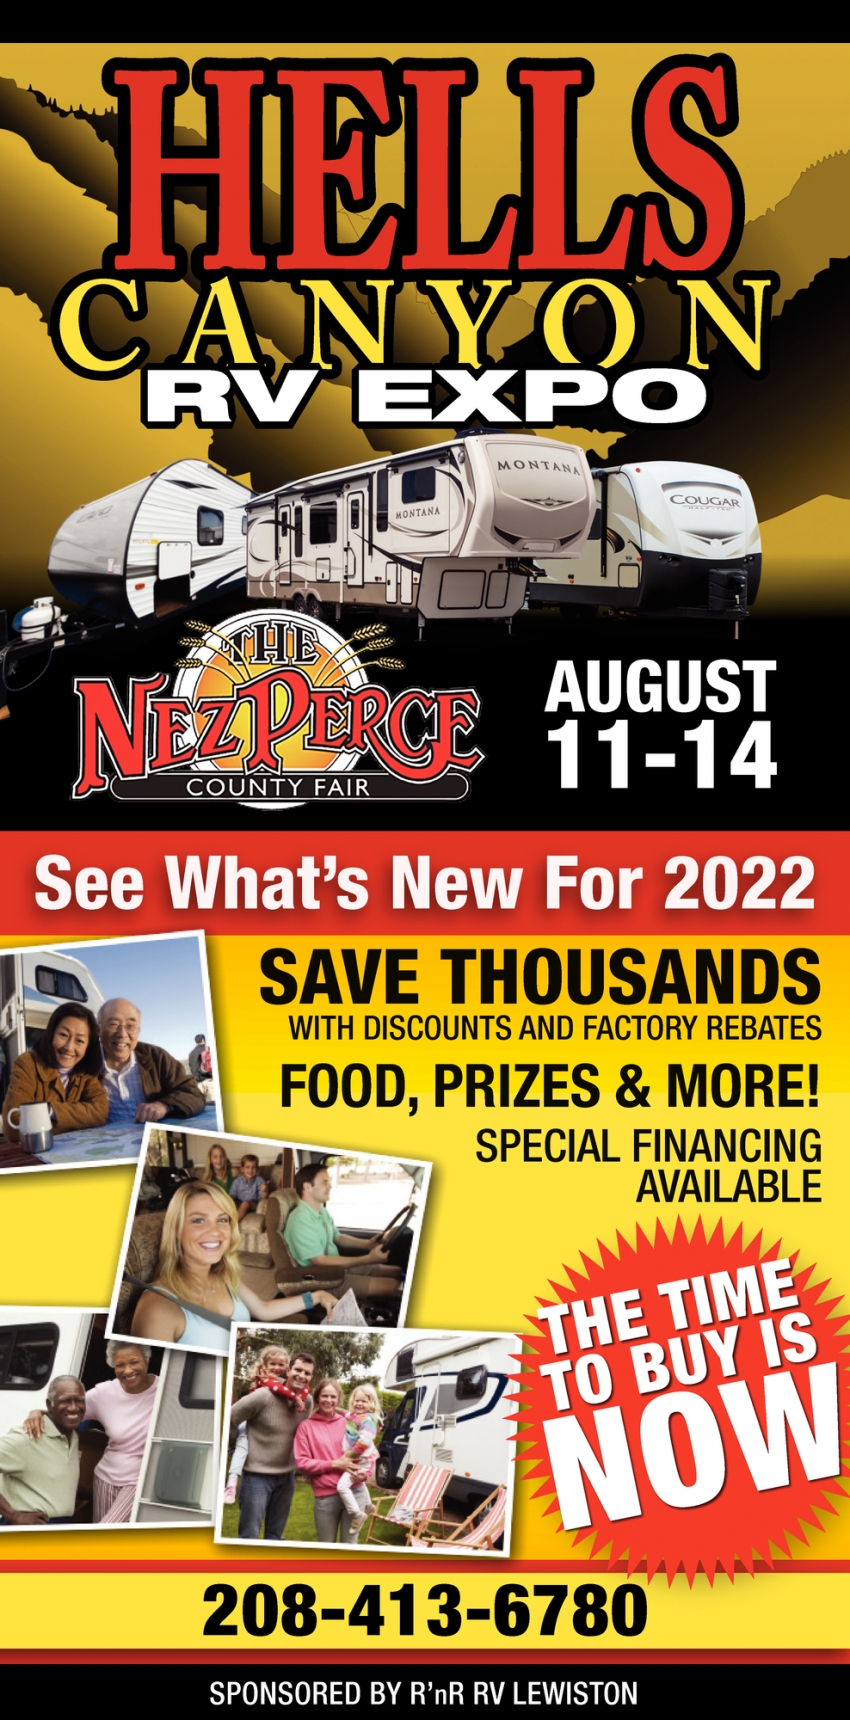 See What's New for 2022, Hells Canyon RV Expo (August 1114, 2022)